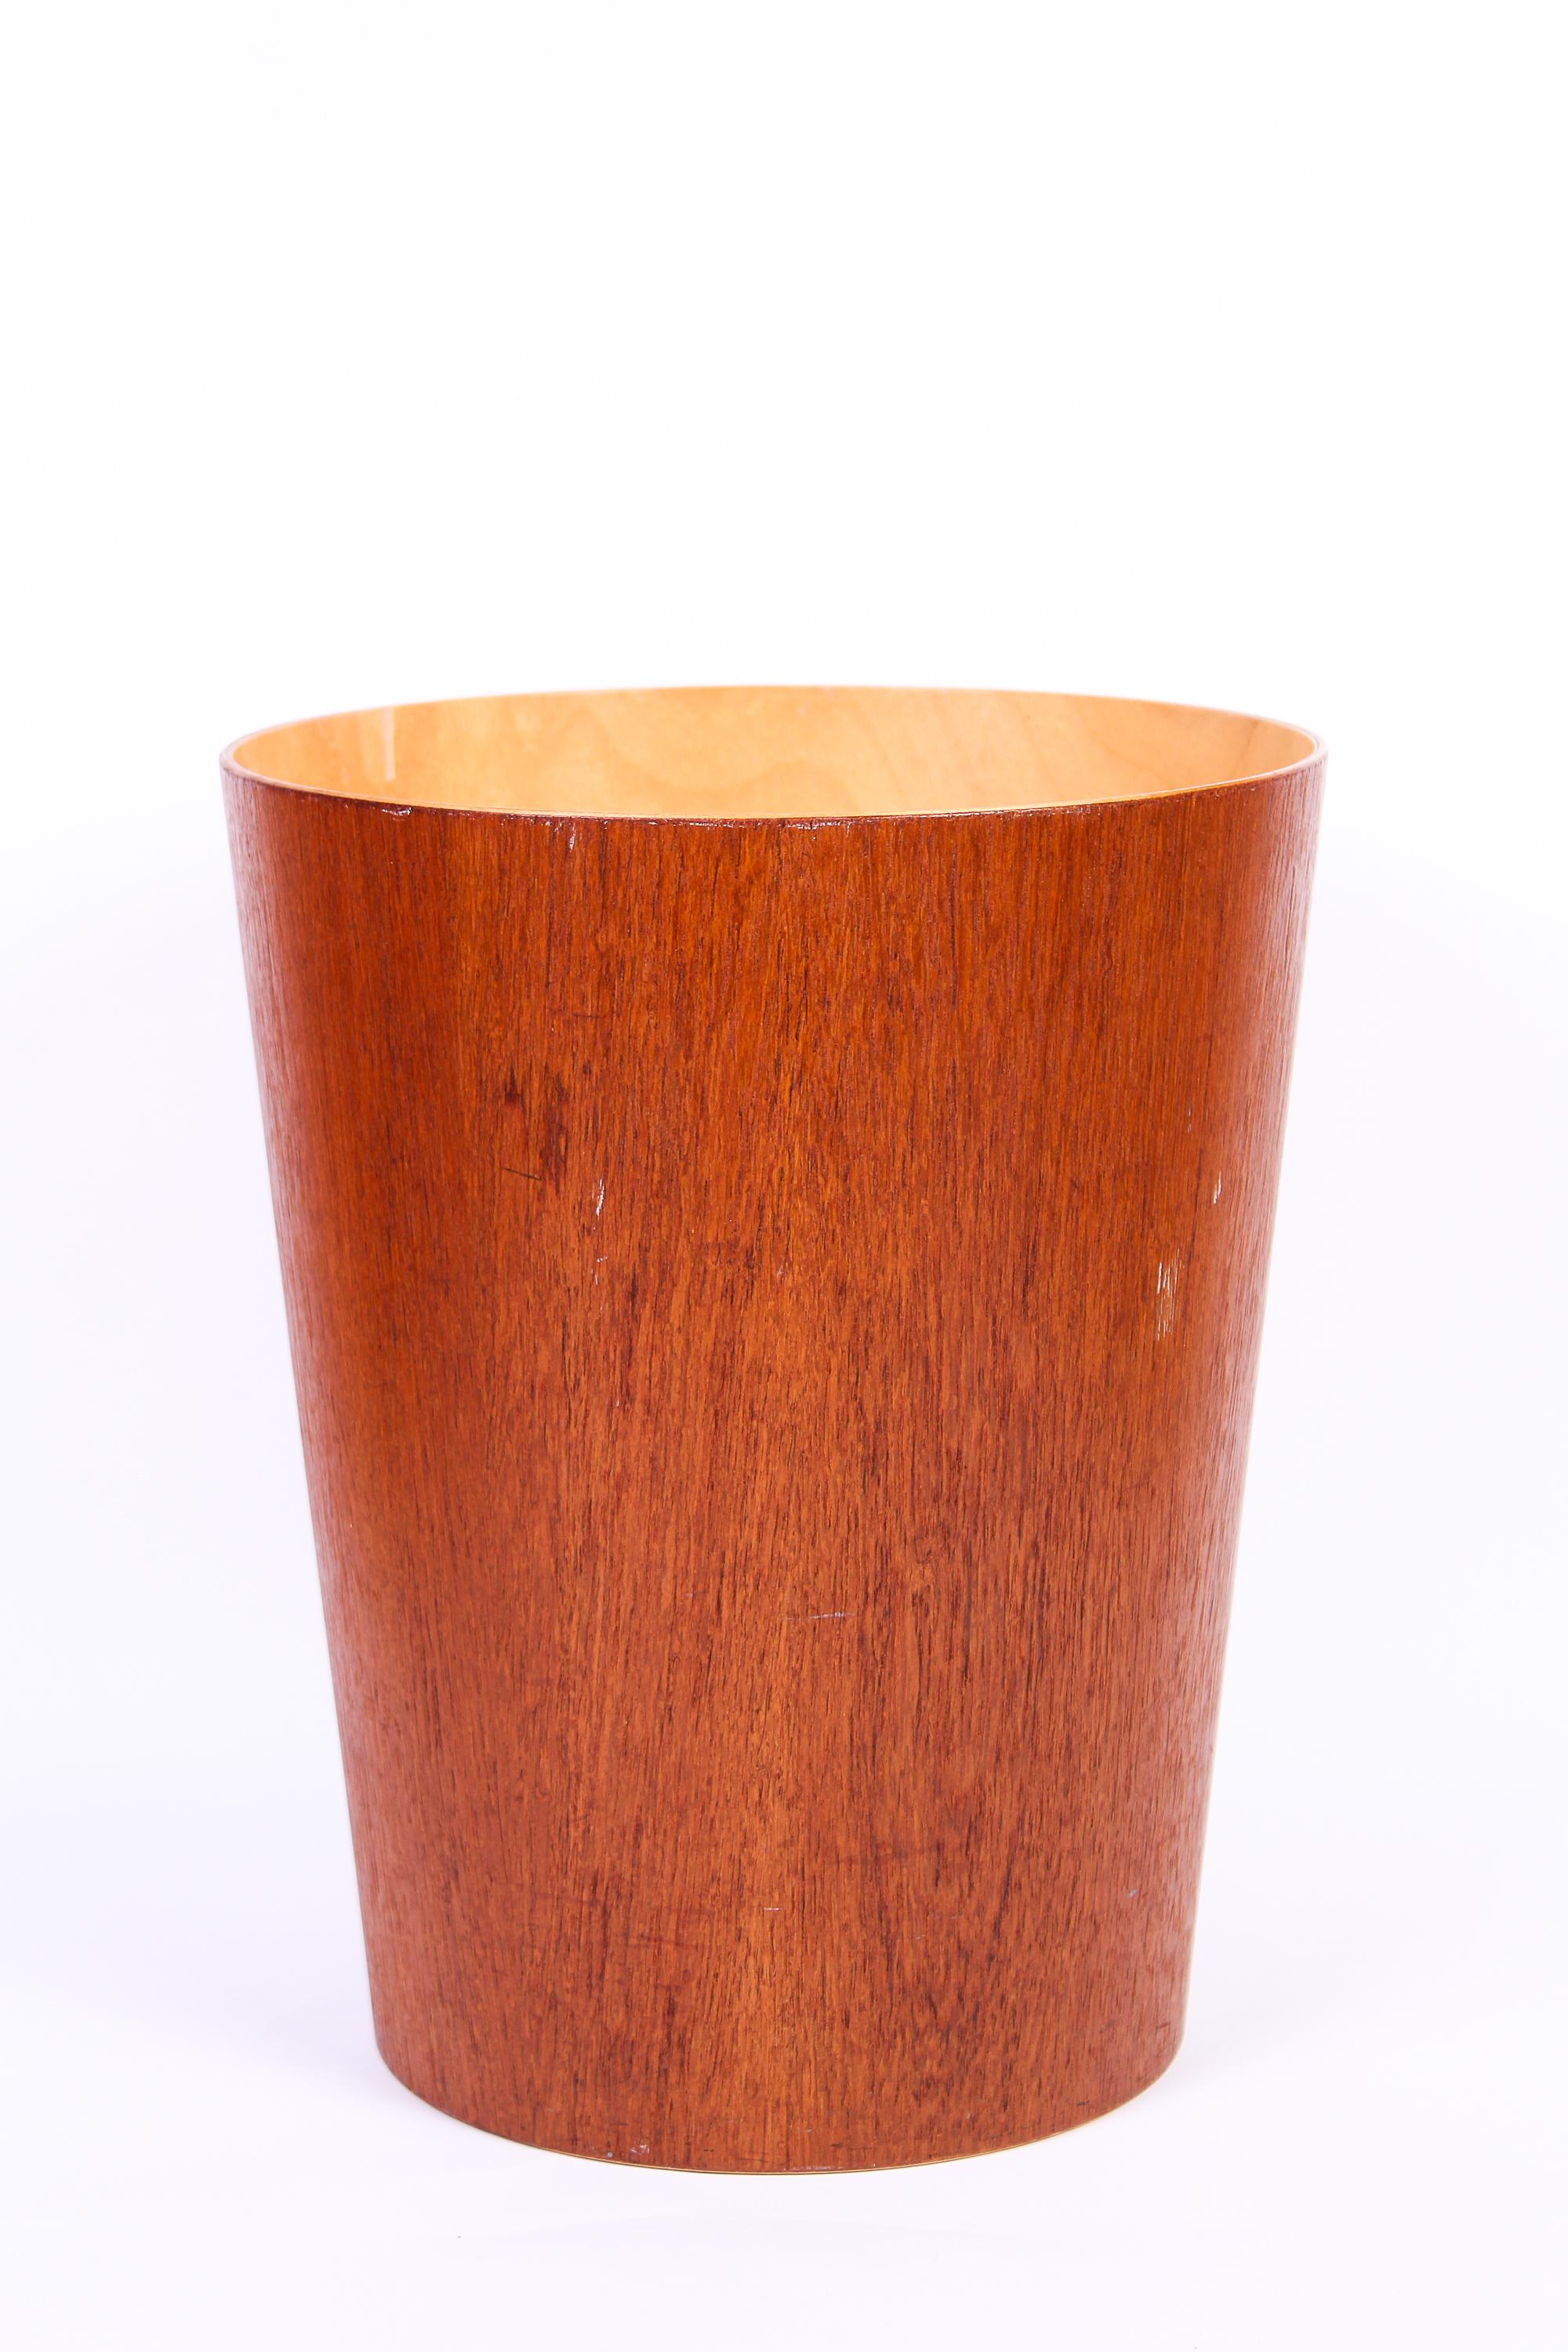 A midcentury paper bin by Swedish manufacturer Serves. This piece was made in the 1950s and are very popular today because of the design and nice teak veneer.

Good vintage condition with signs of usage consistent with age and use. Small veneer